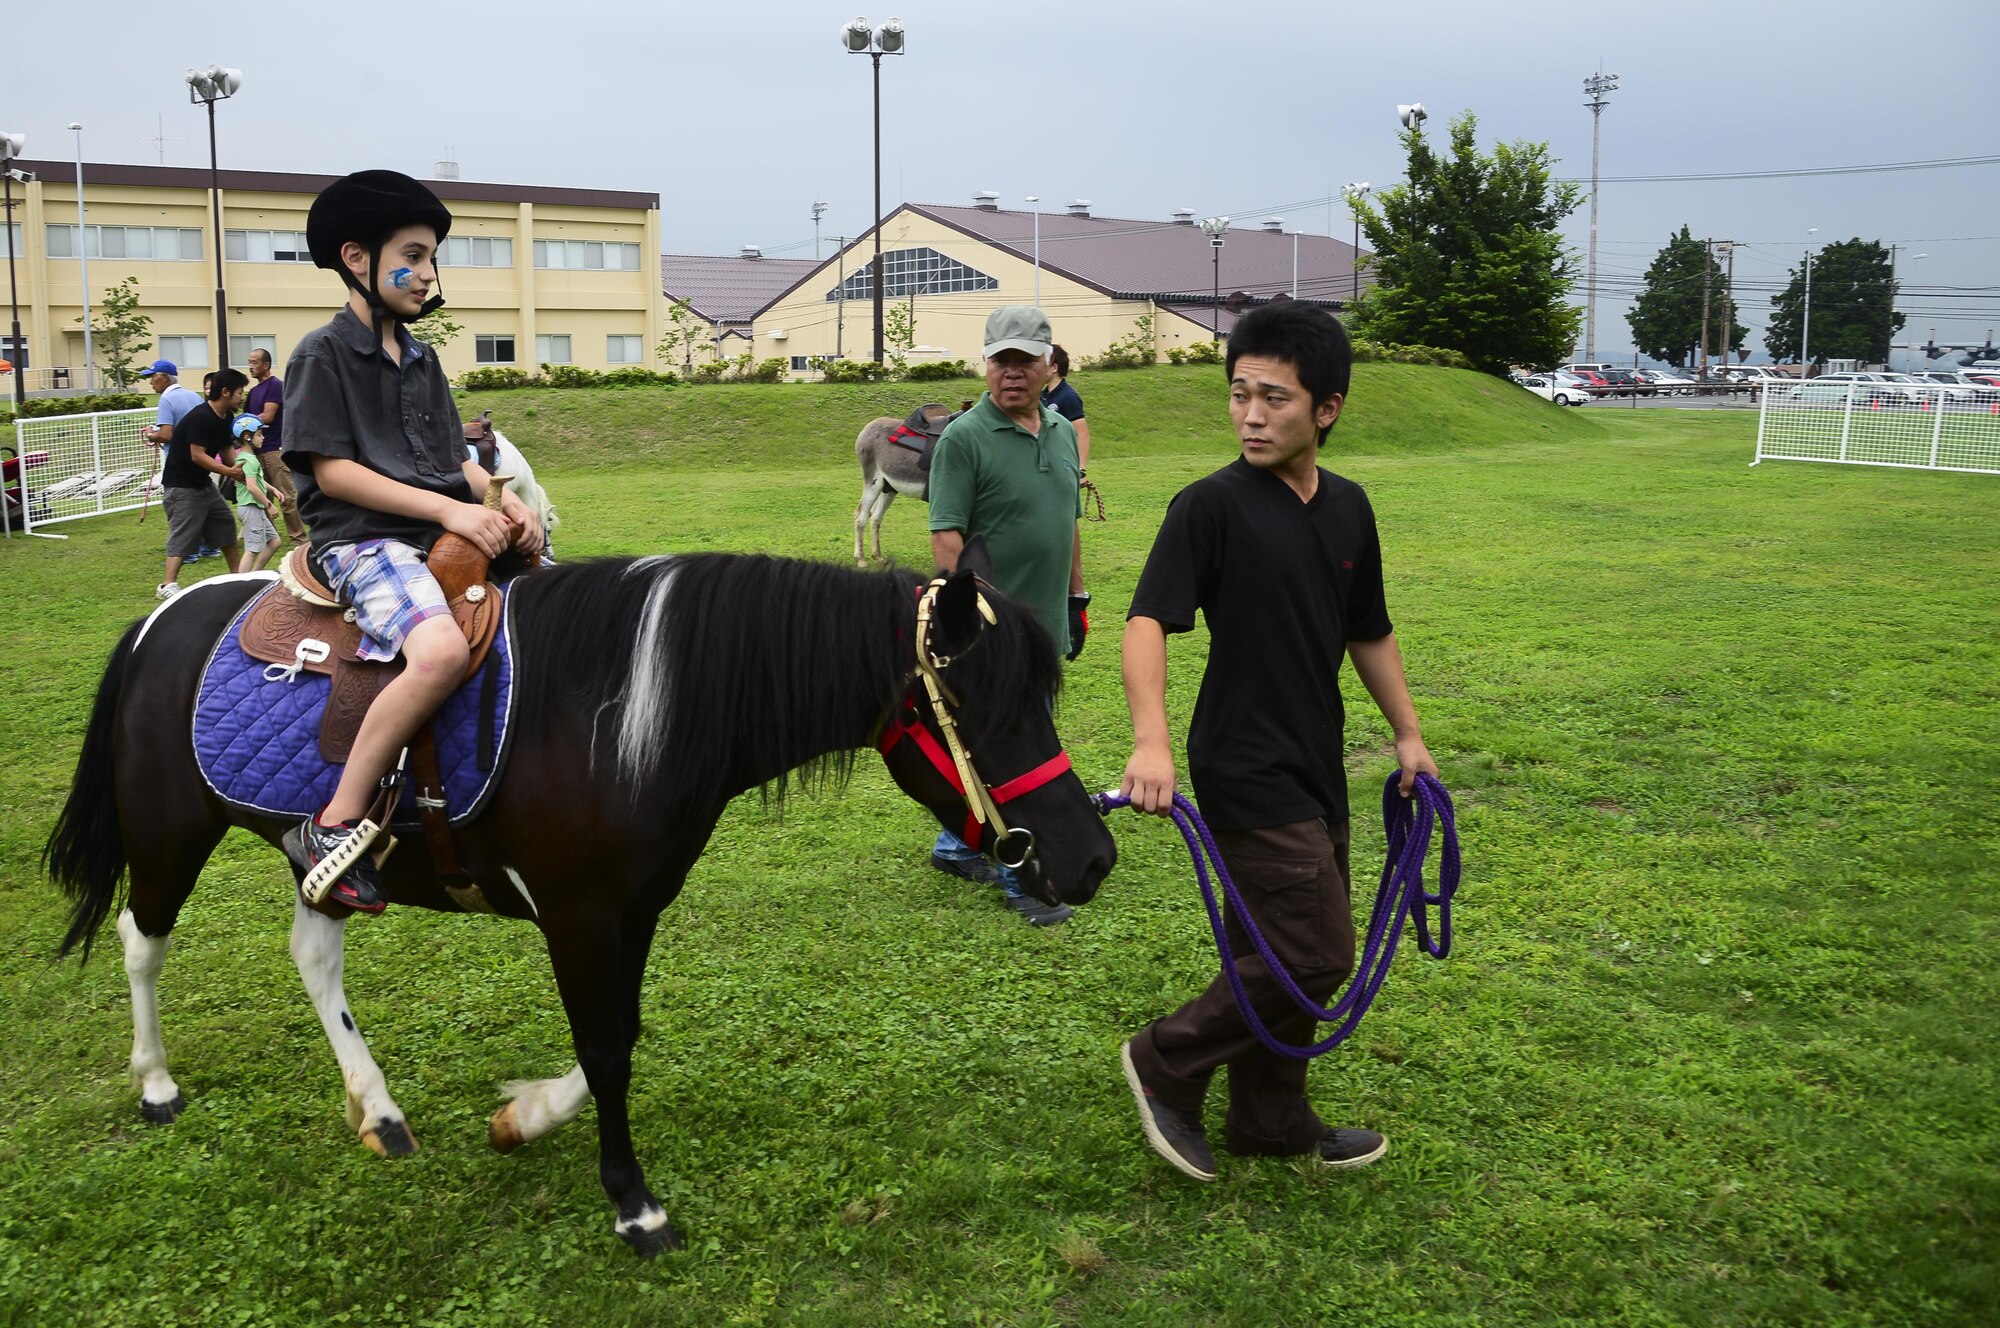 Radek Hungler, son of David Hungler, 374th Office of Special Investigations special agent, rides a pony during the Celebrate America event at Yokota Air Base, Japan, July 2, 2015. The annual event  provided military members and their families the opportunity to enjoy games, food and bands before culminating in a fireworks display to celebrate Independence Day. (U.S. Air Force photo by Senior Airman David Owsianka/Released)